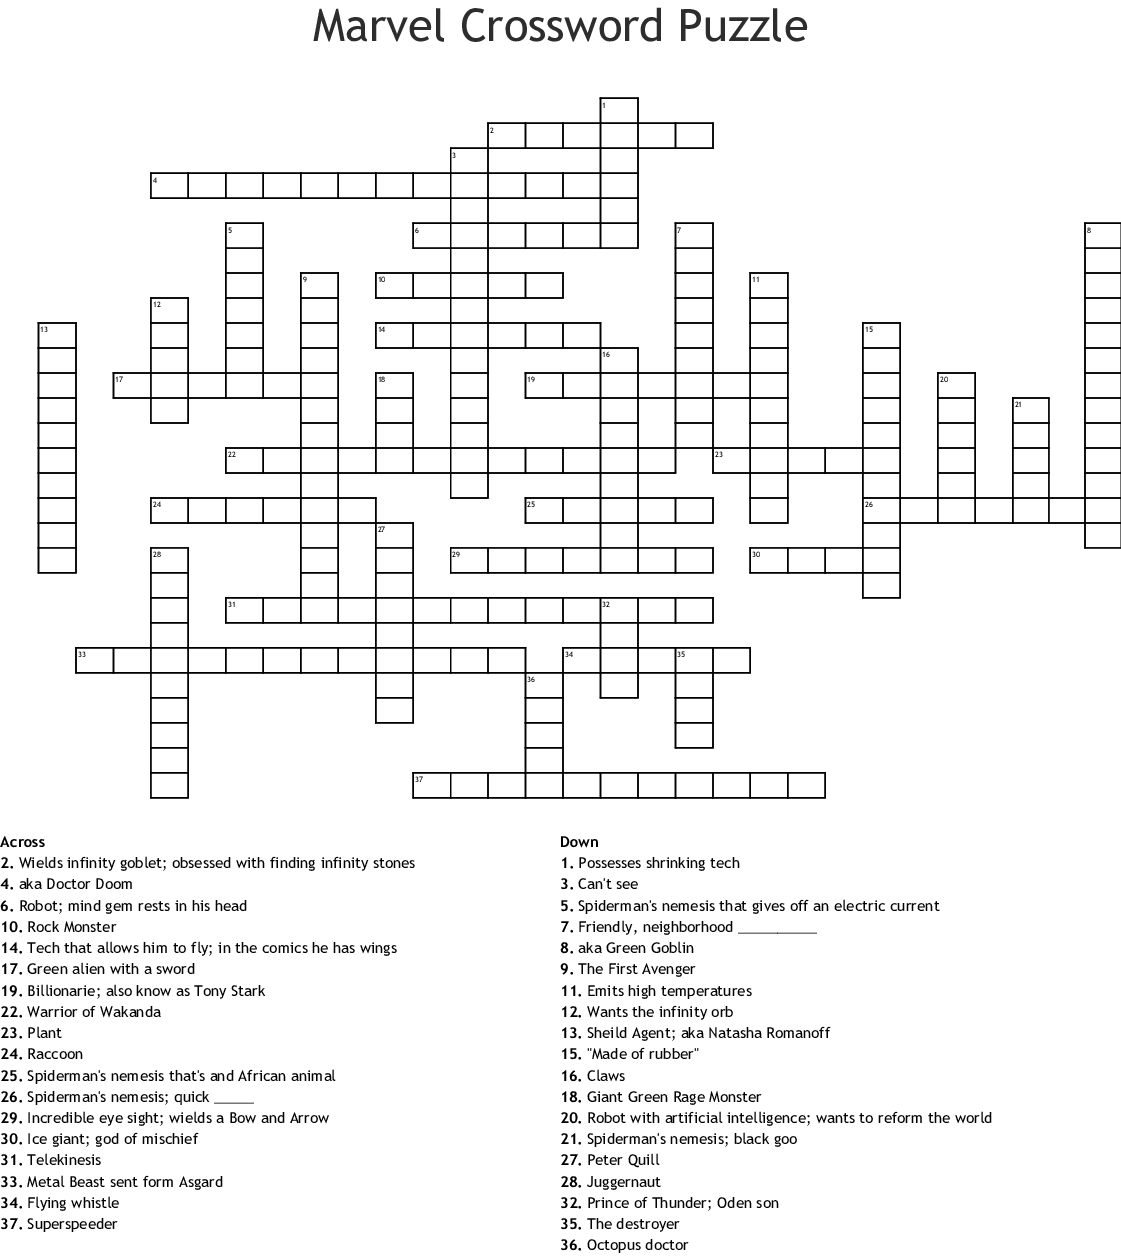 Printable Character Words Crossword Puzzles